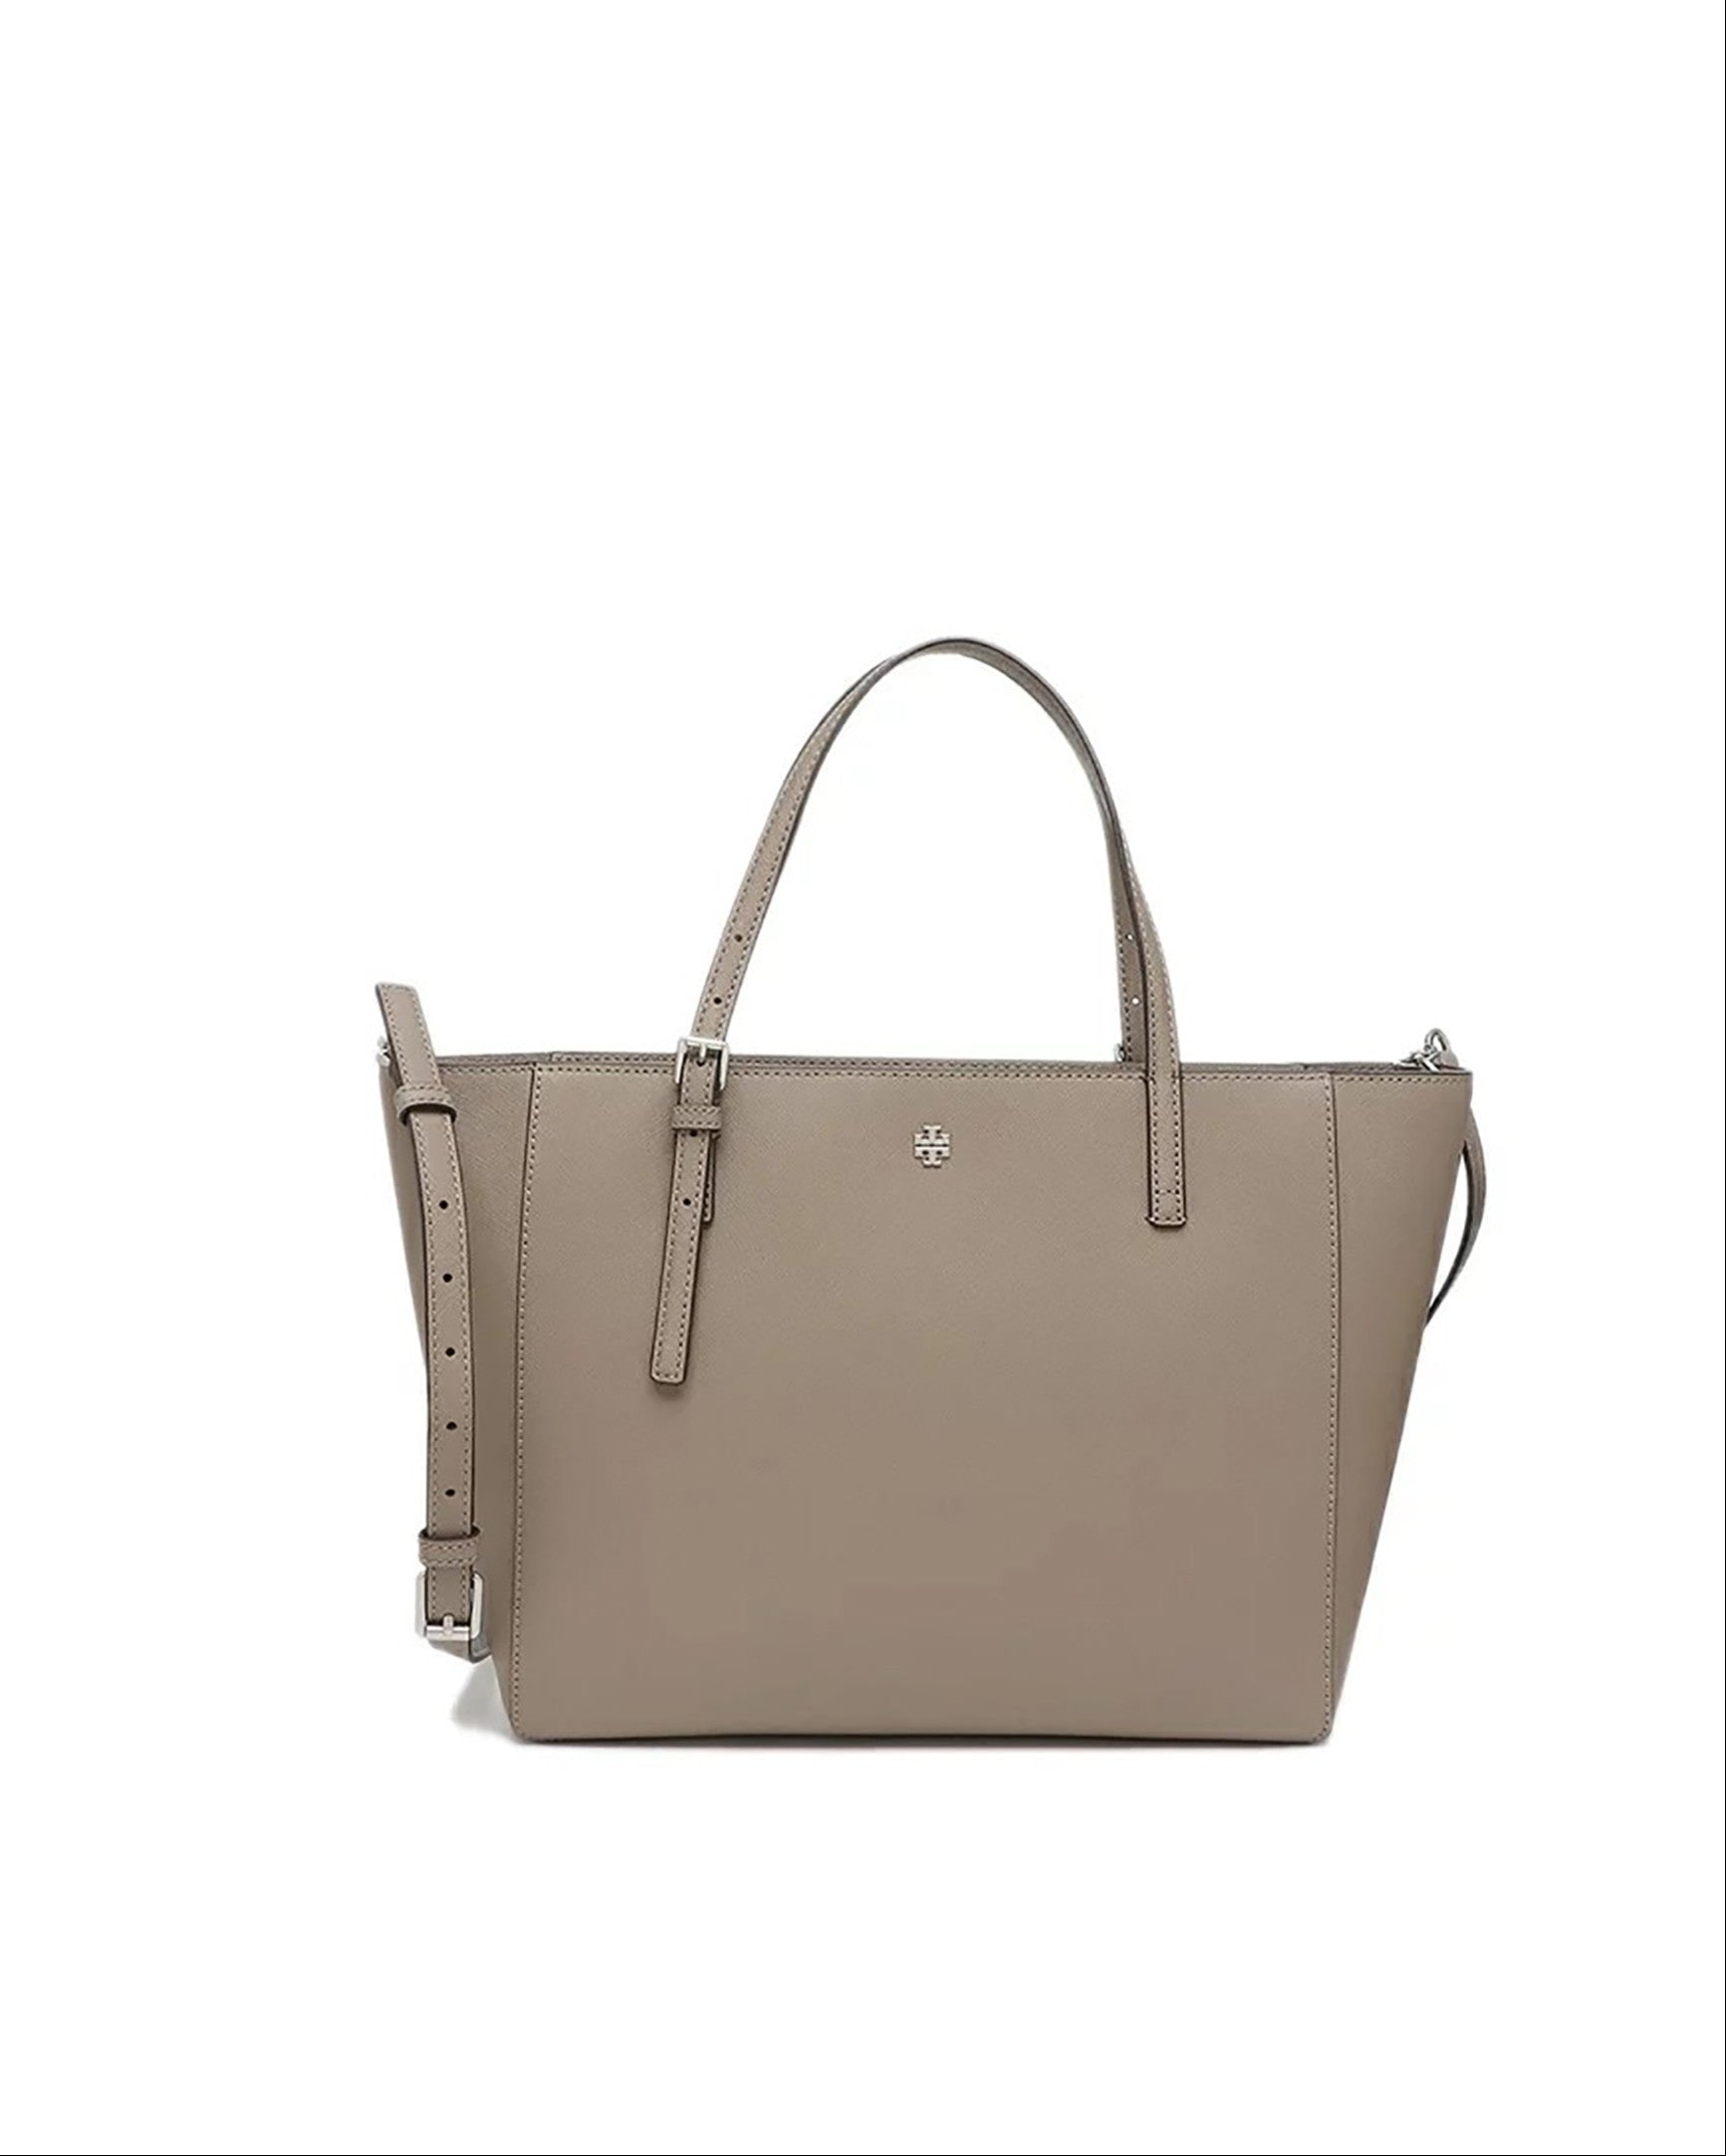 Tory Burch Bags | New Tory Burch Emerson Tote | Color: Gray/Silver | Size: Os | Diala1987's Closet